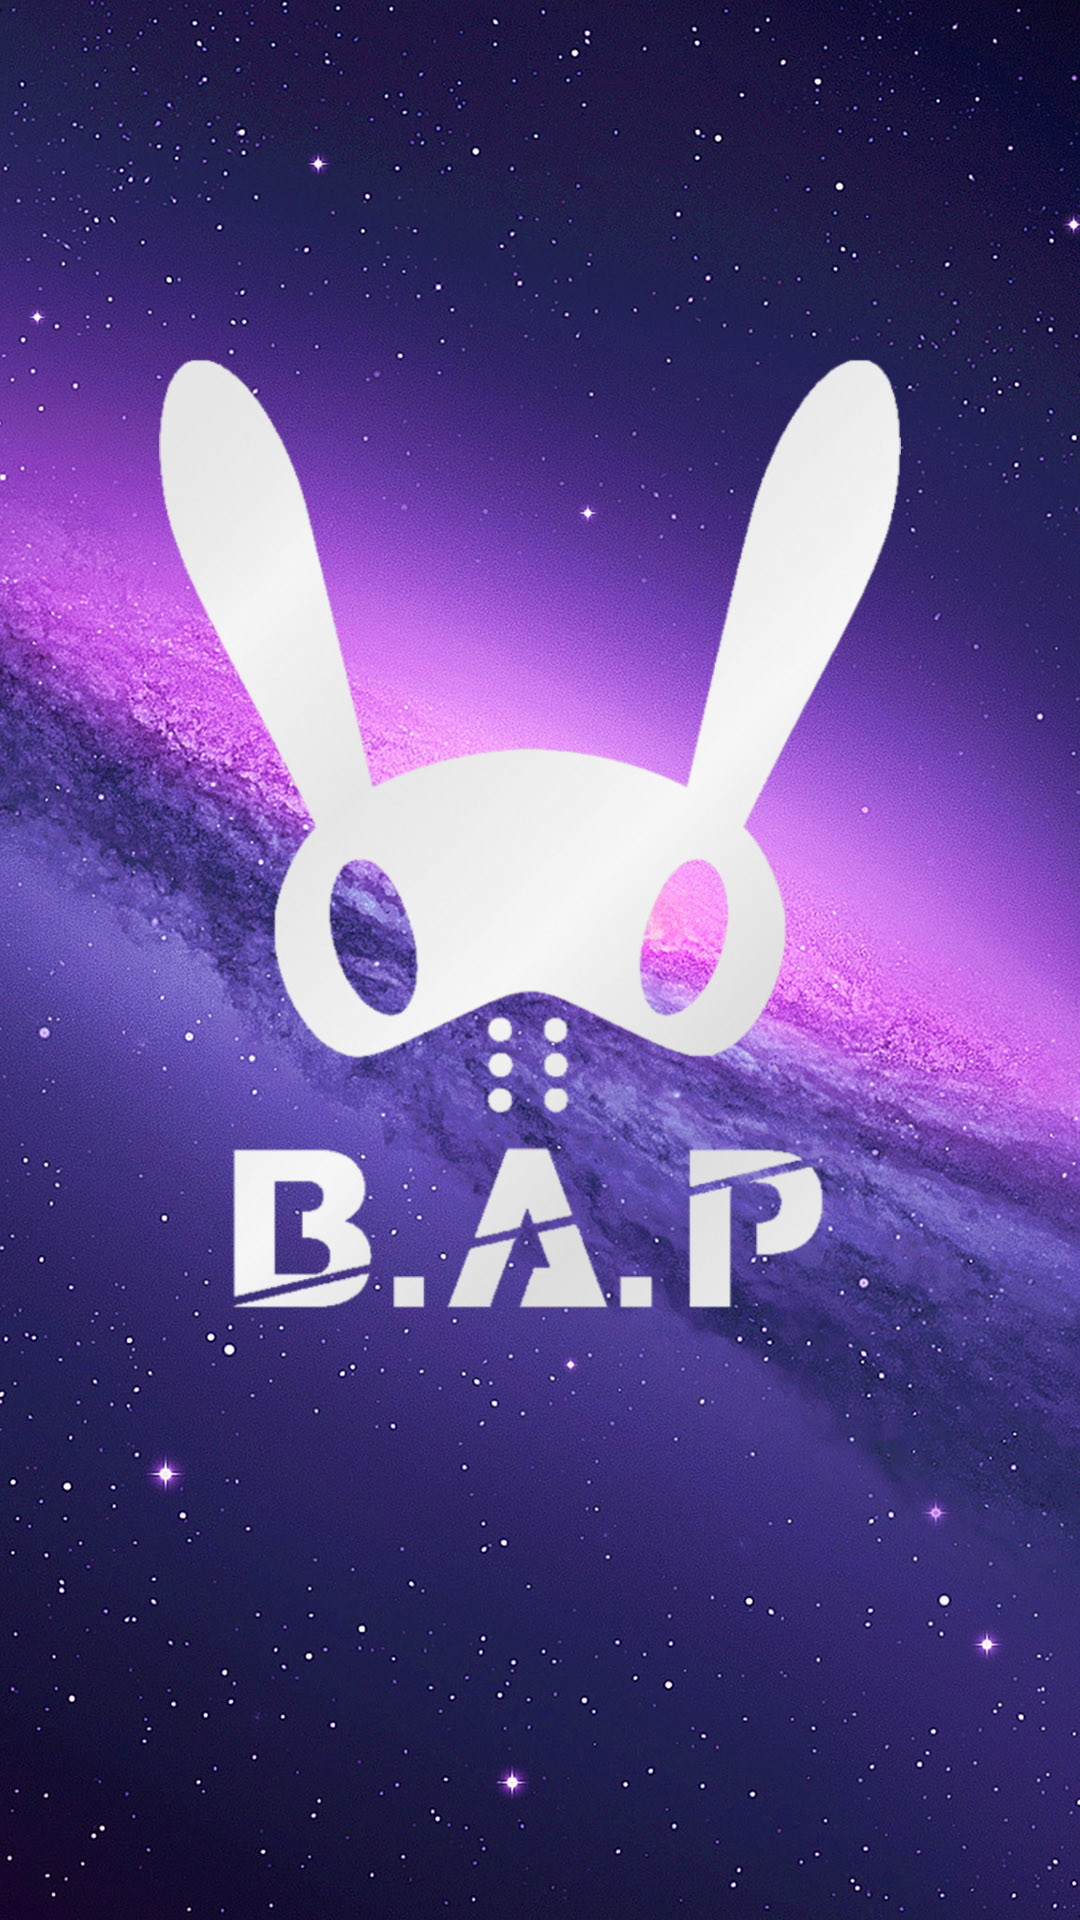 1080x1920 Bap High Quality Wallpapers Gallery, PWK.780410456